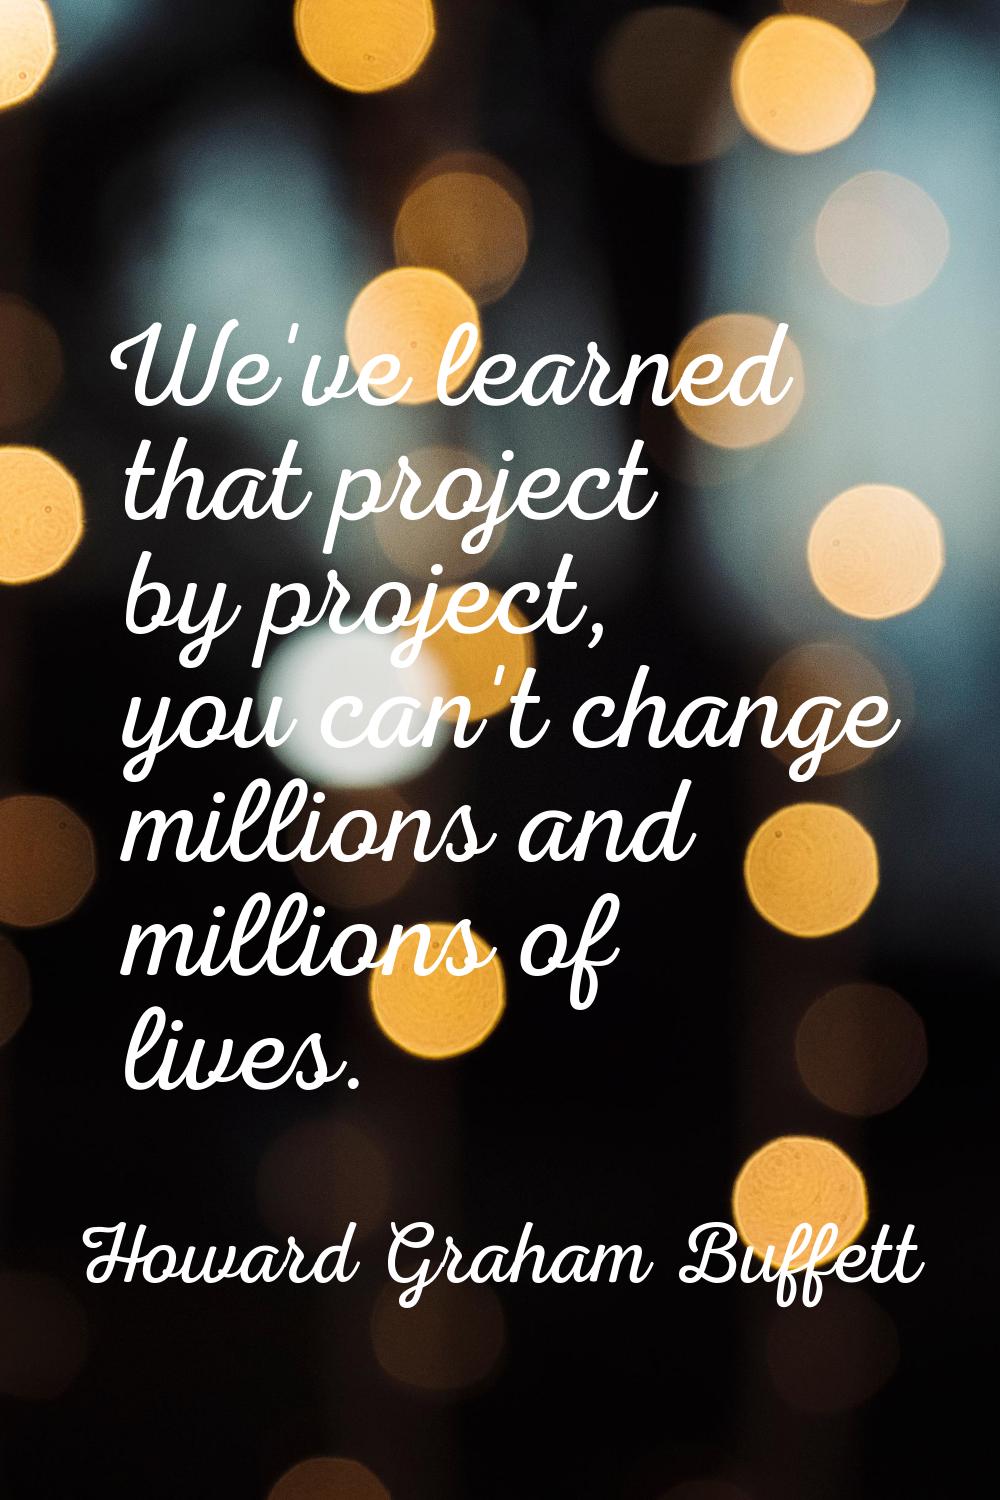 We've learned that project by project, you can't change millions and millions of lives.